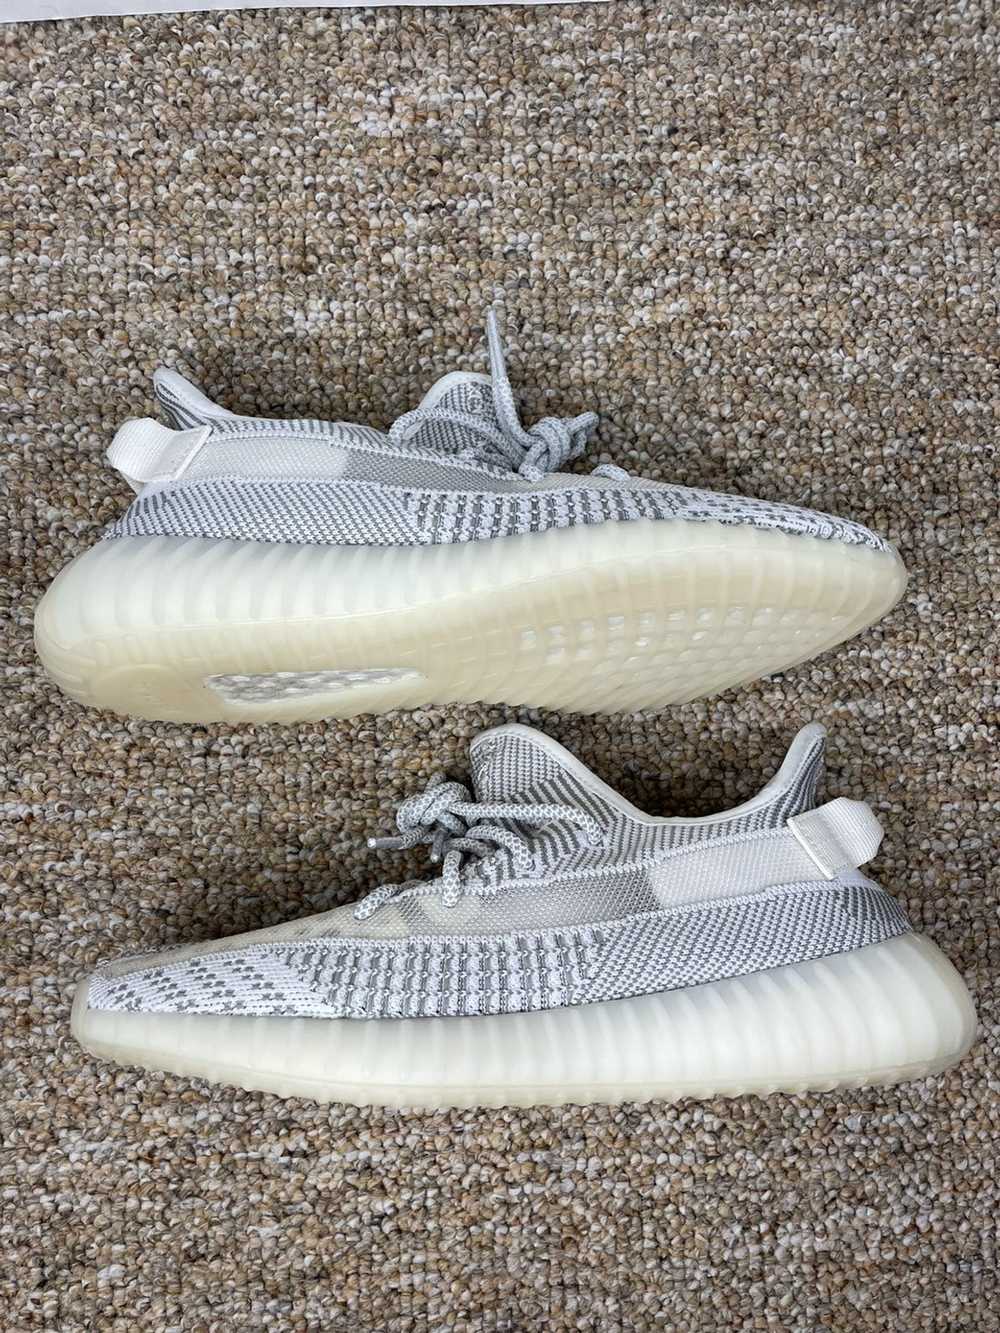 Adidas Yeezy Boost 350 V2 Static Non Reflective - image 2